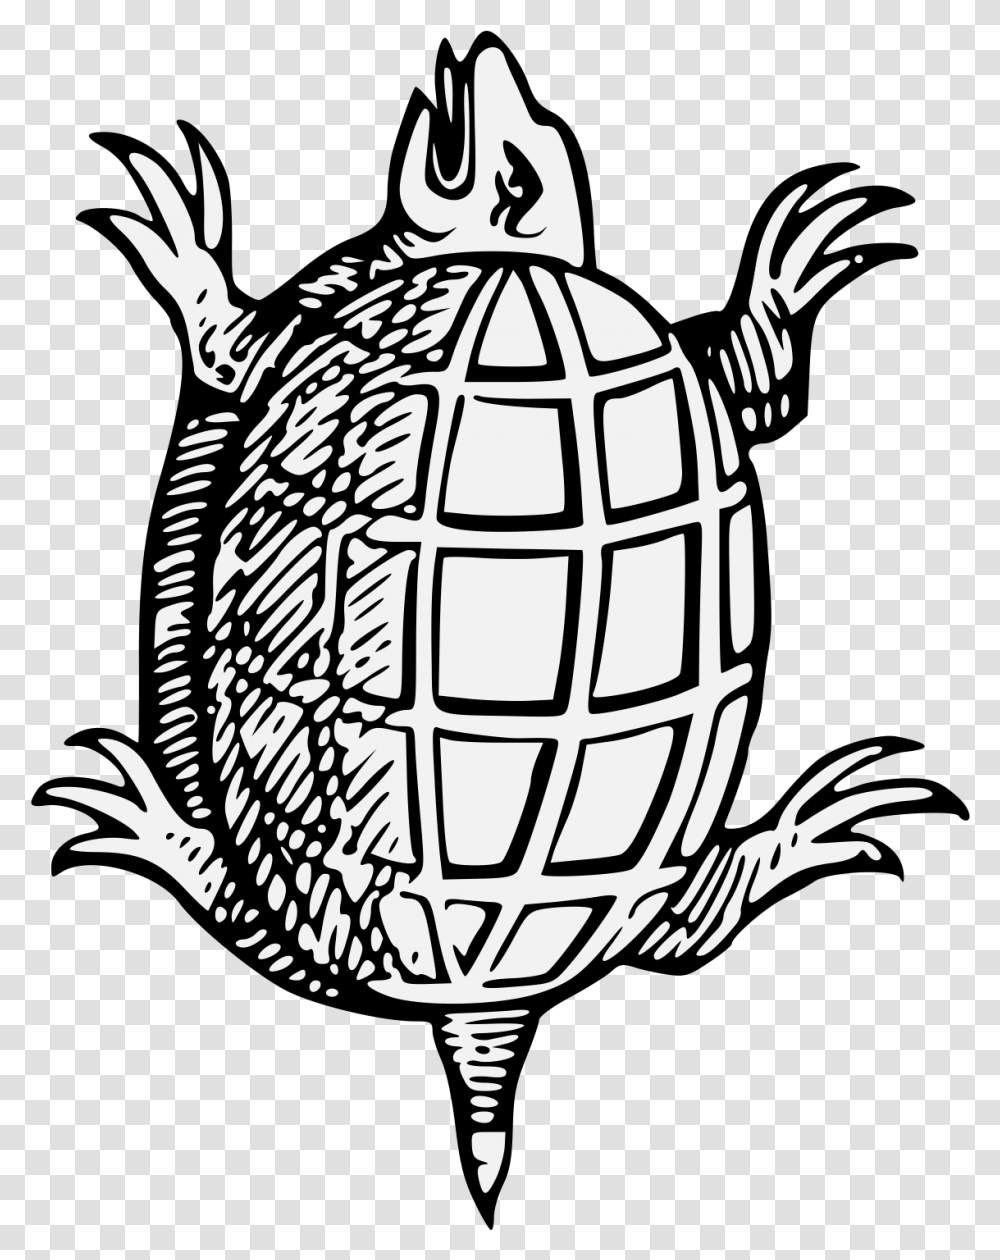 Tortoise Clipart Black And White Turtle Heraldic, Stencil, Weapon, Weaponry, Bomb Transparent Png